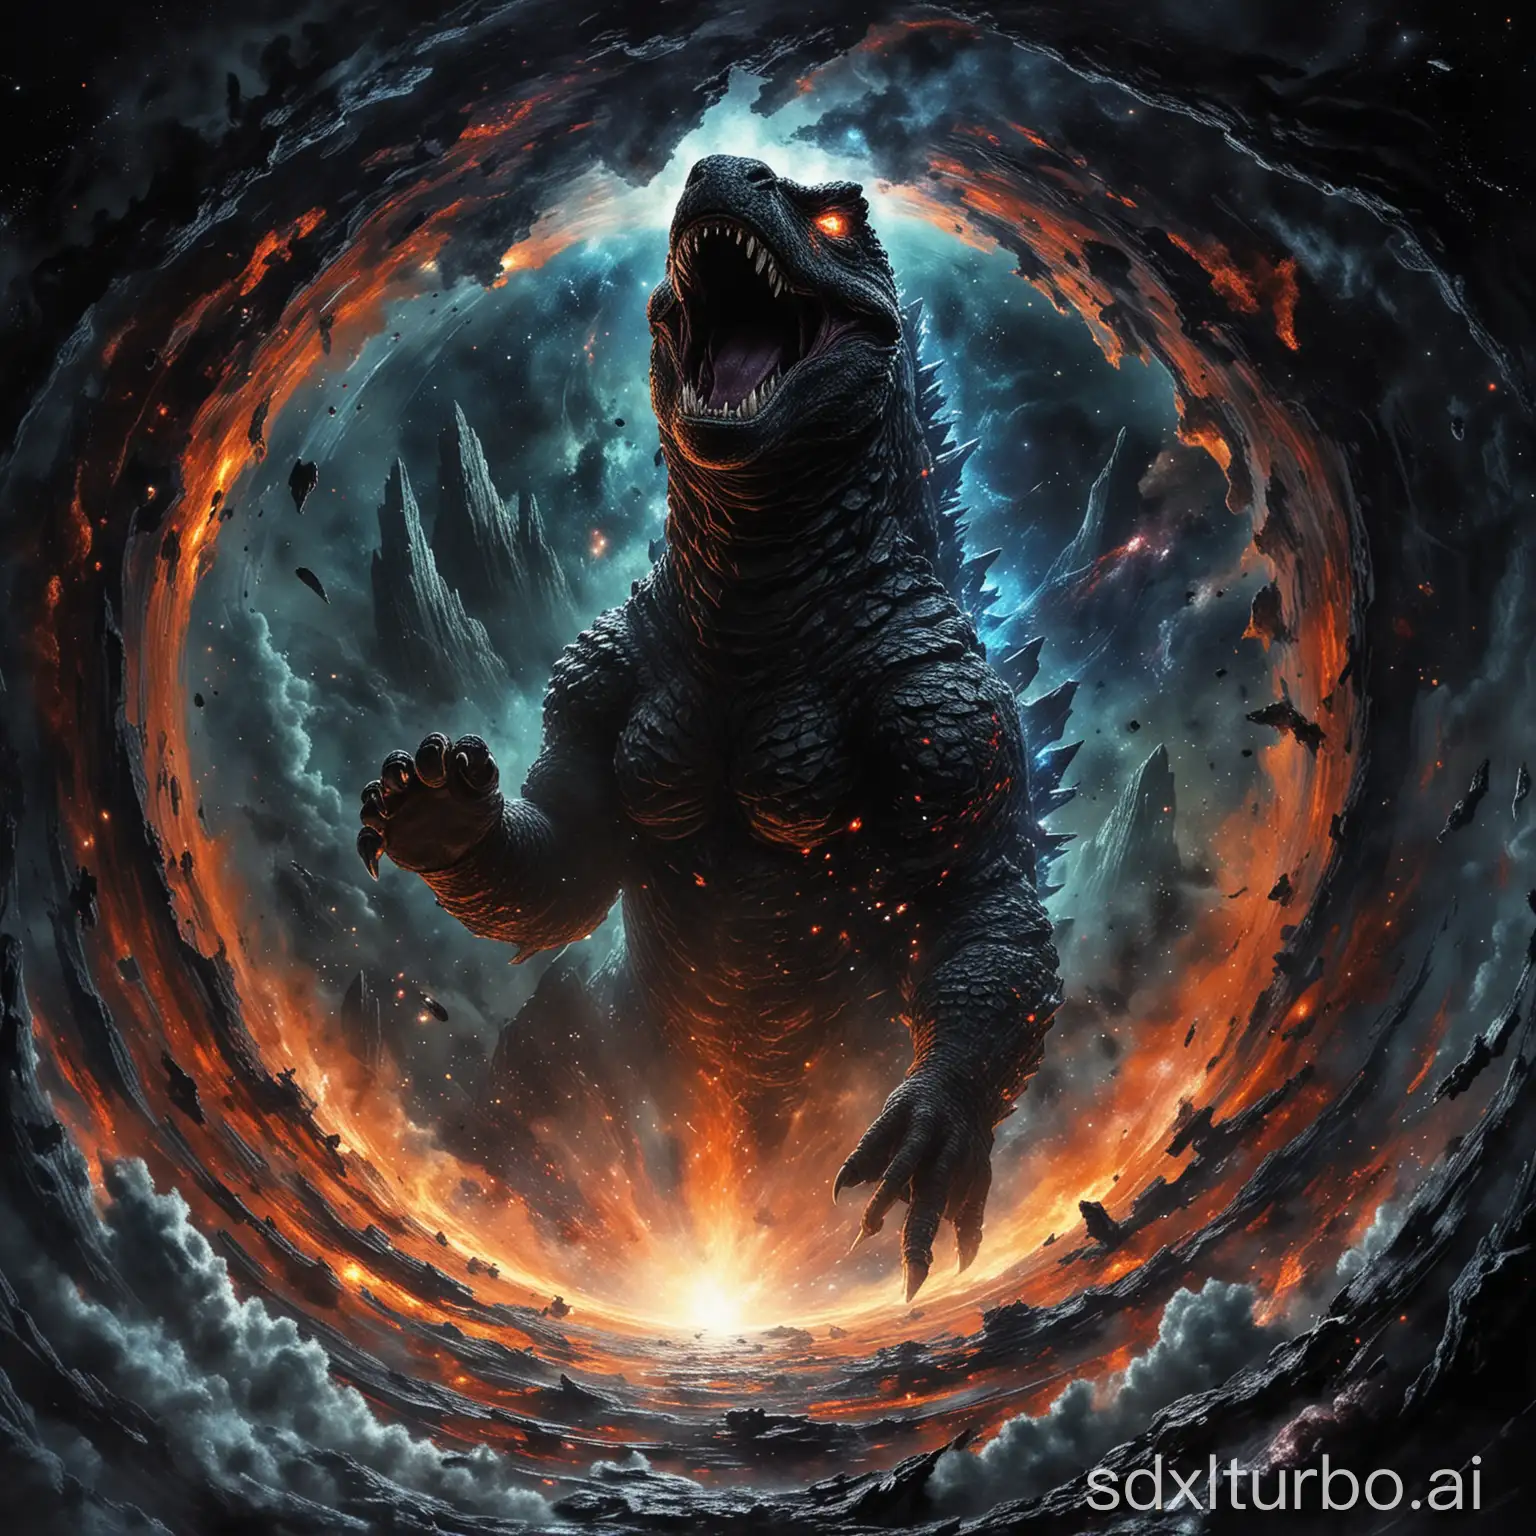 Cosmic-Encounter-Godzilla-in-a-Black-Hole-Surrounded-by-Galaxies